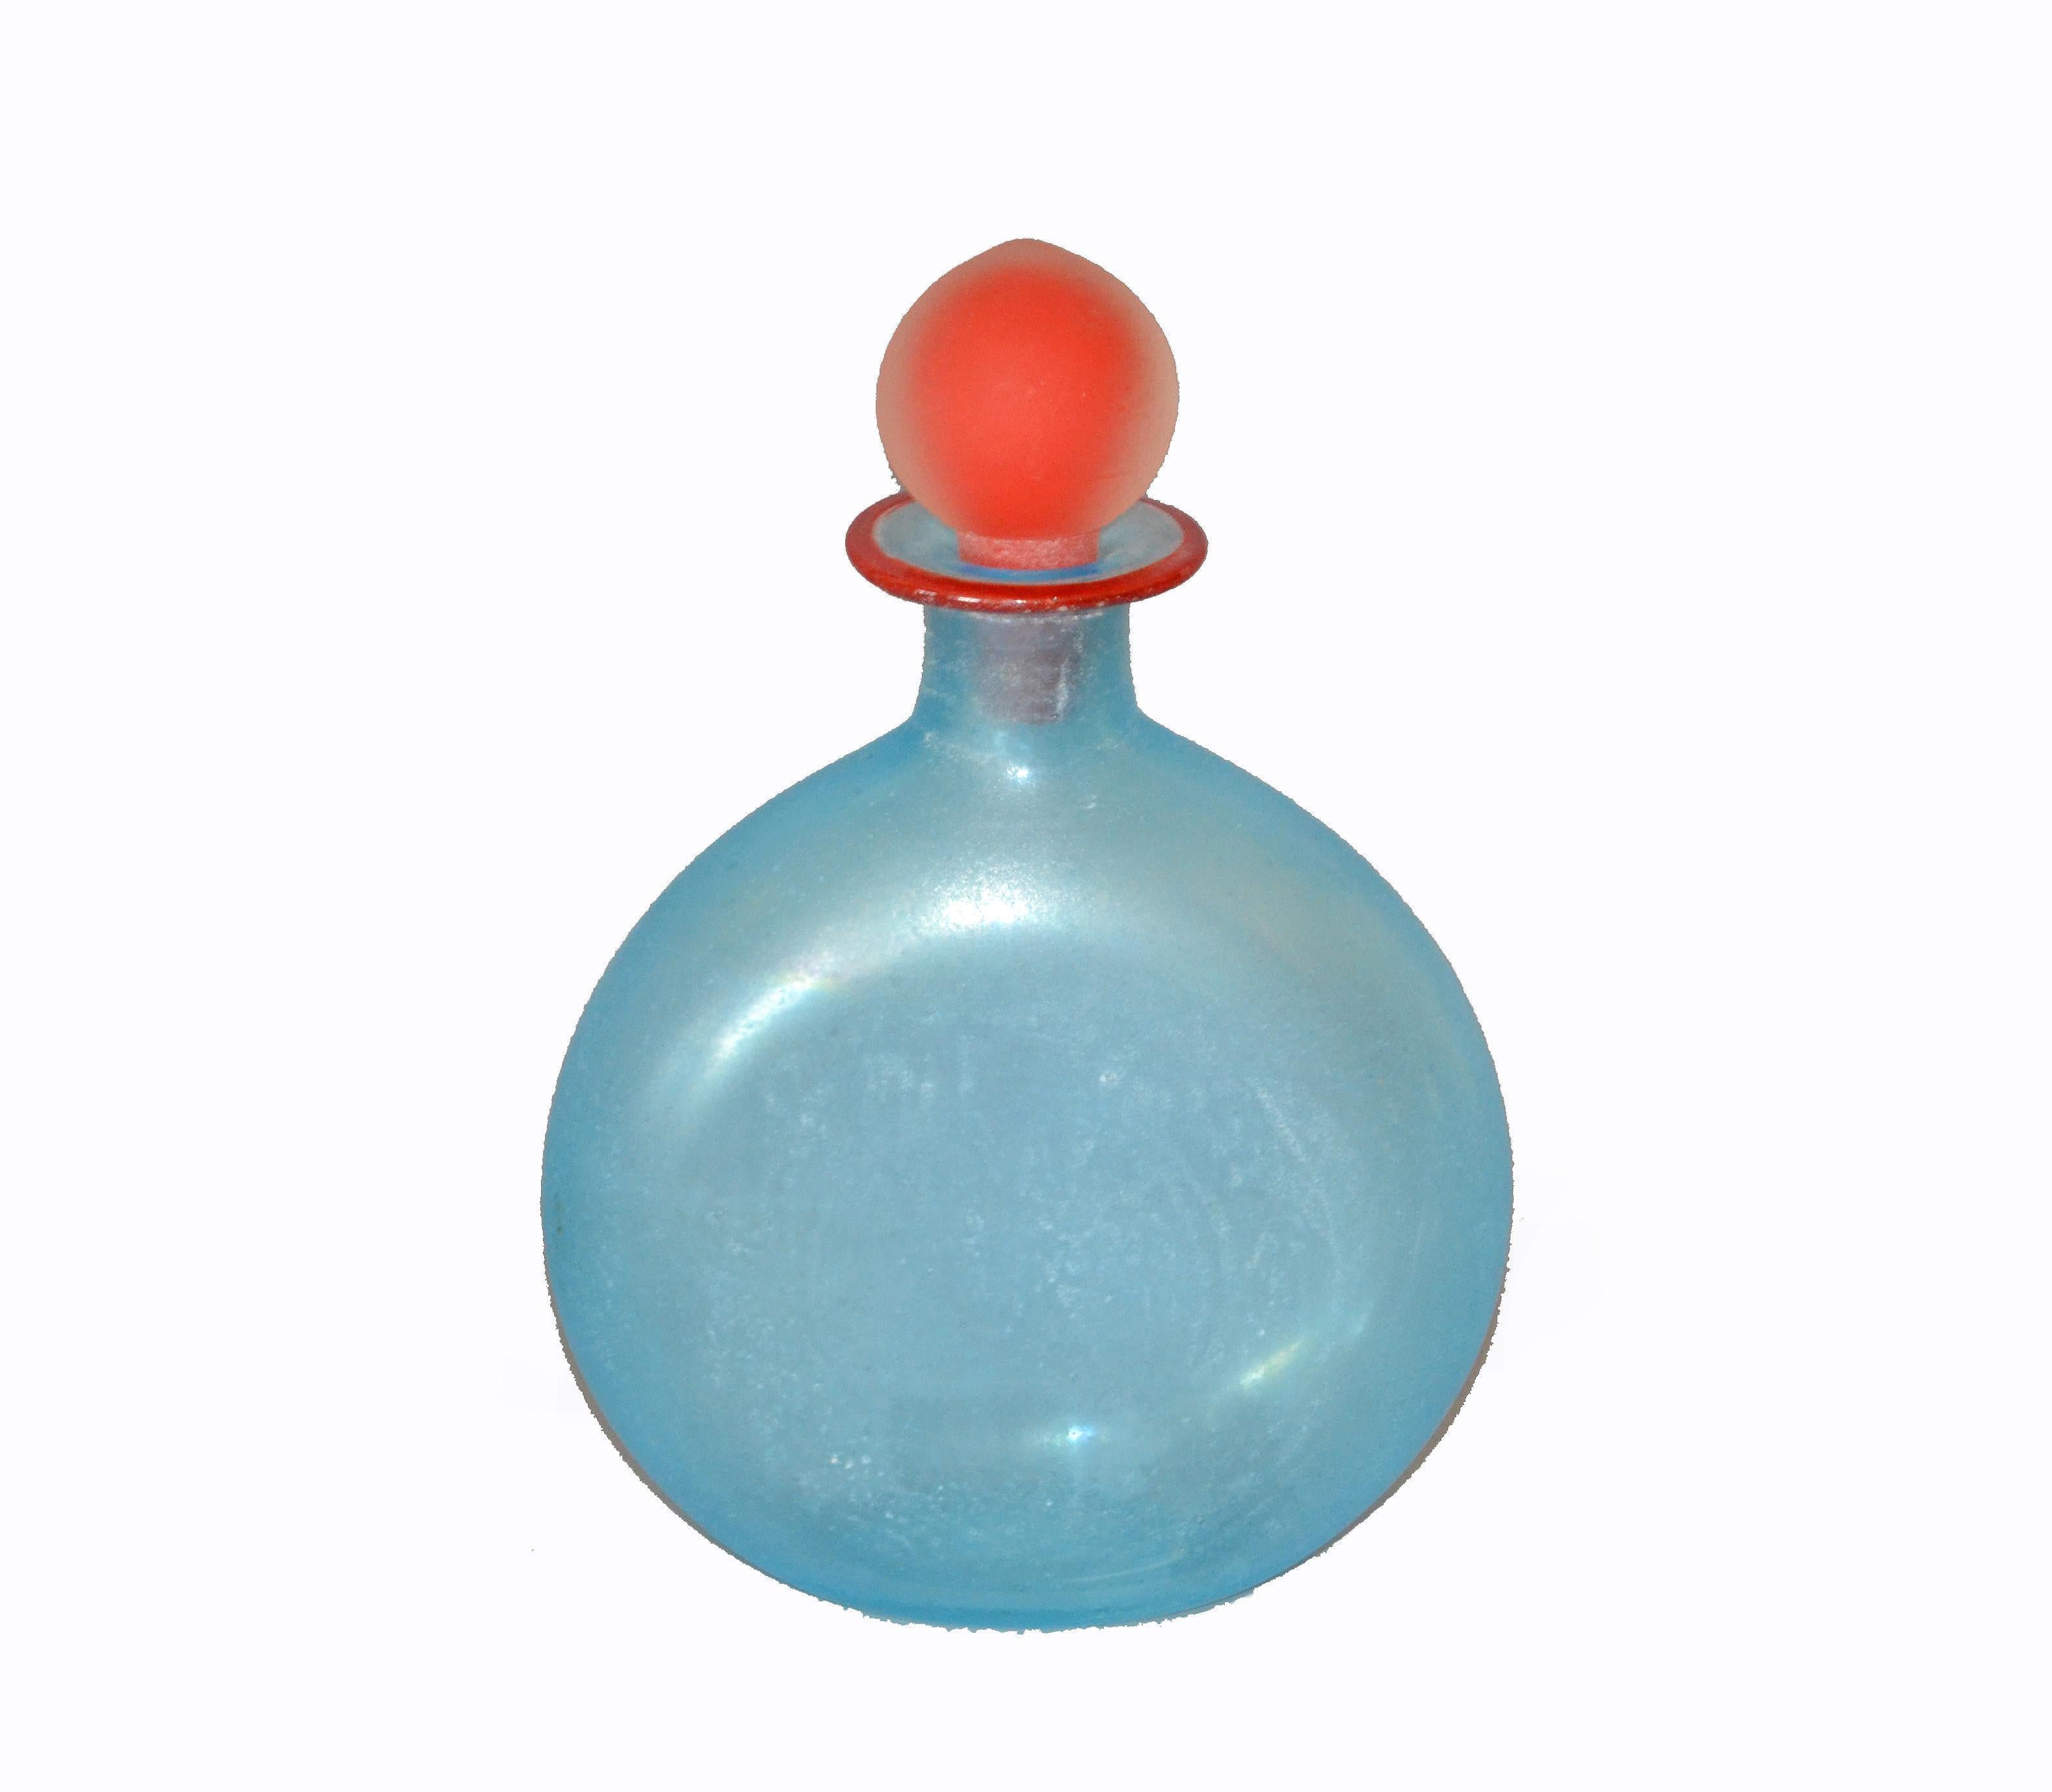 Mid-Century Modern Venetian Blue Murano Art Glass Decanter, Vessel with Red Stopper, Italy